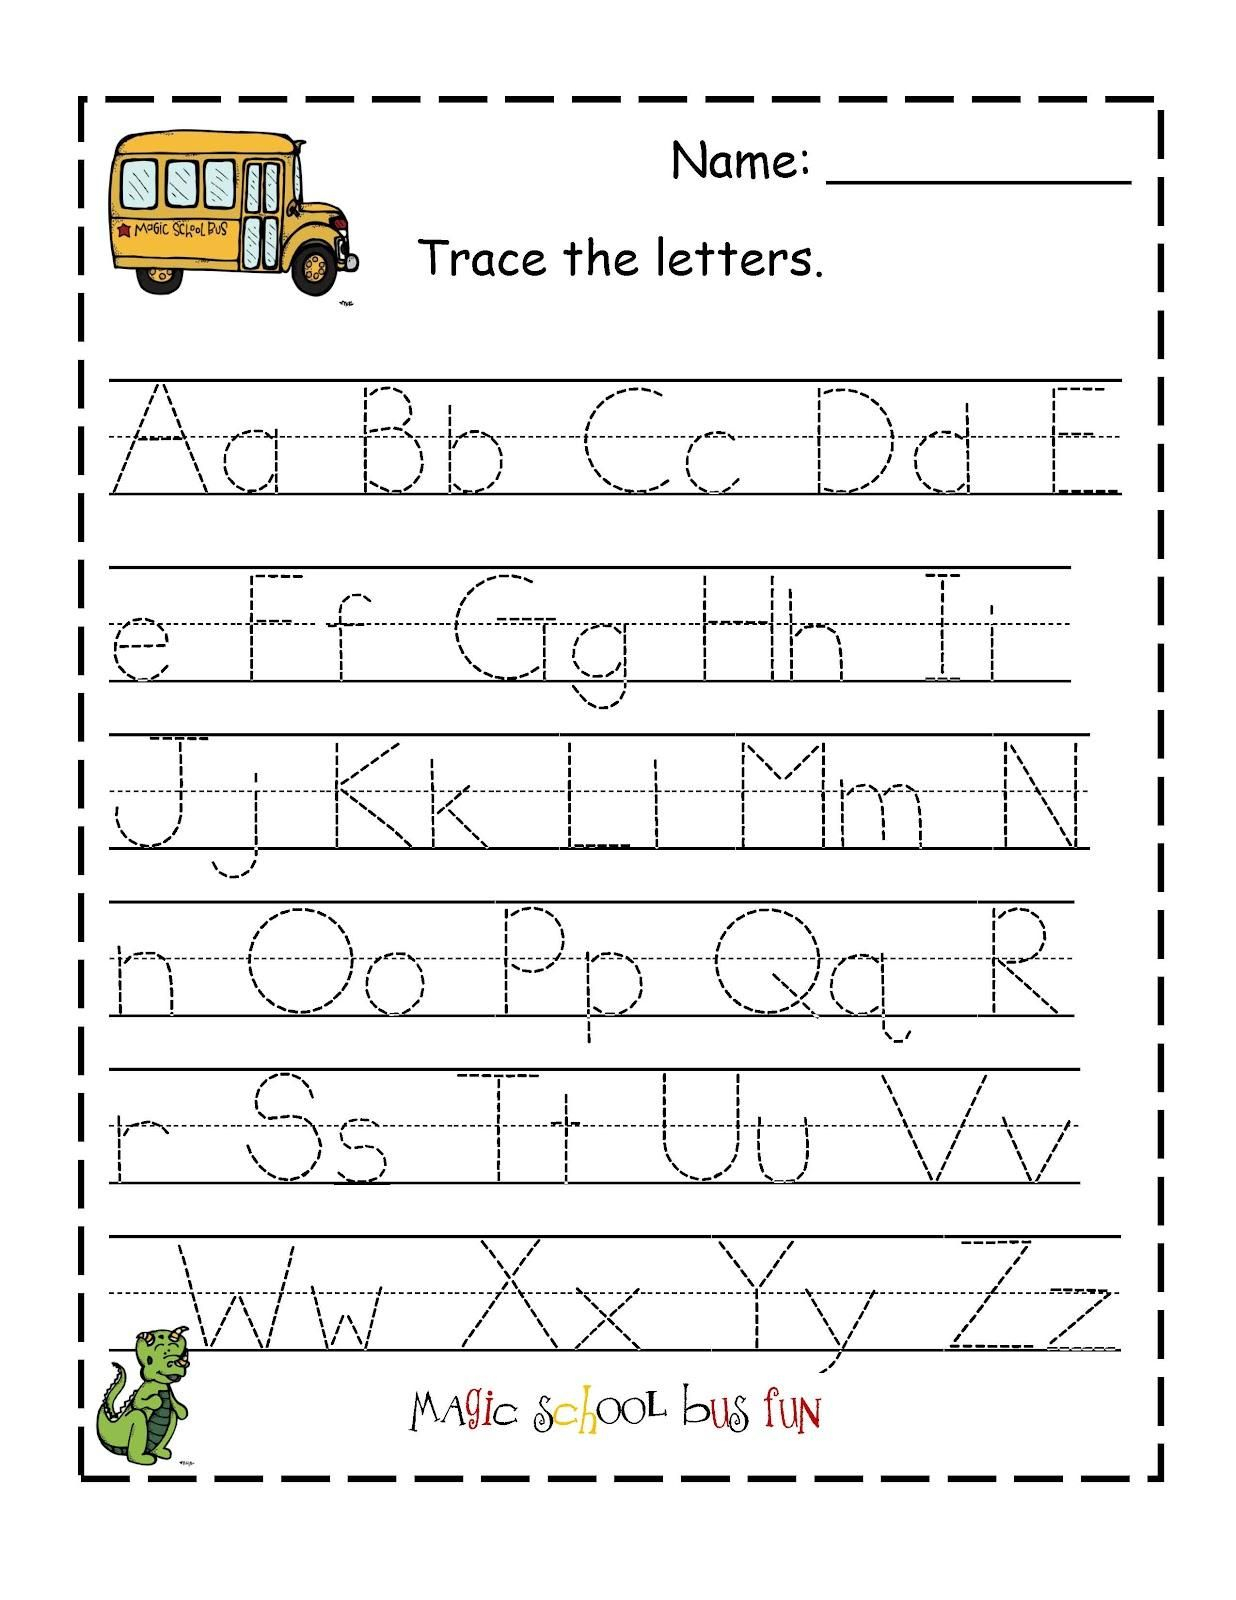 Free Printable Abc Tracing Worksheets #2 | Preschool with Tracing Letters For Kindergarten Free